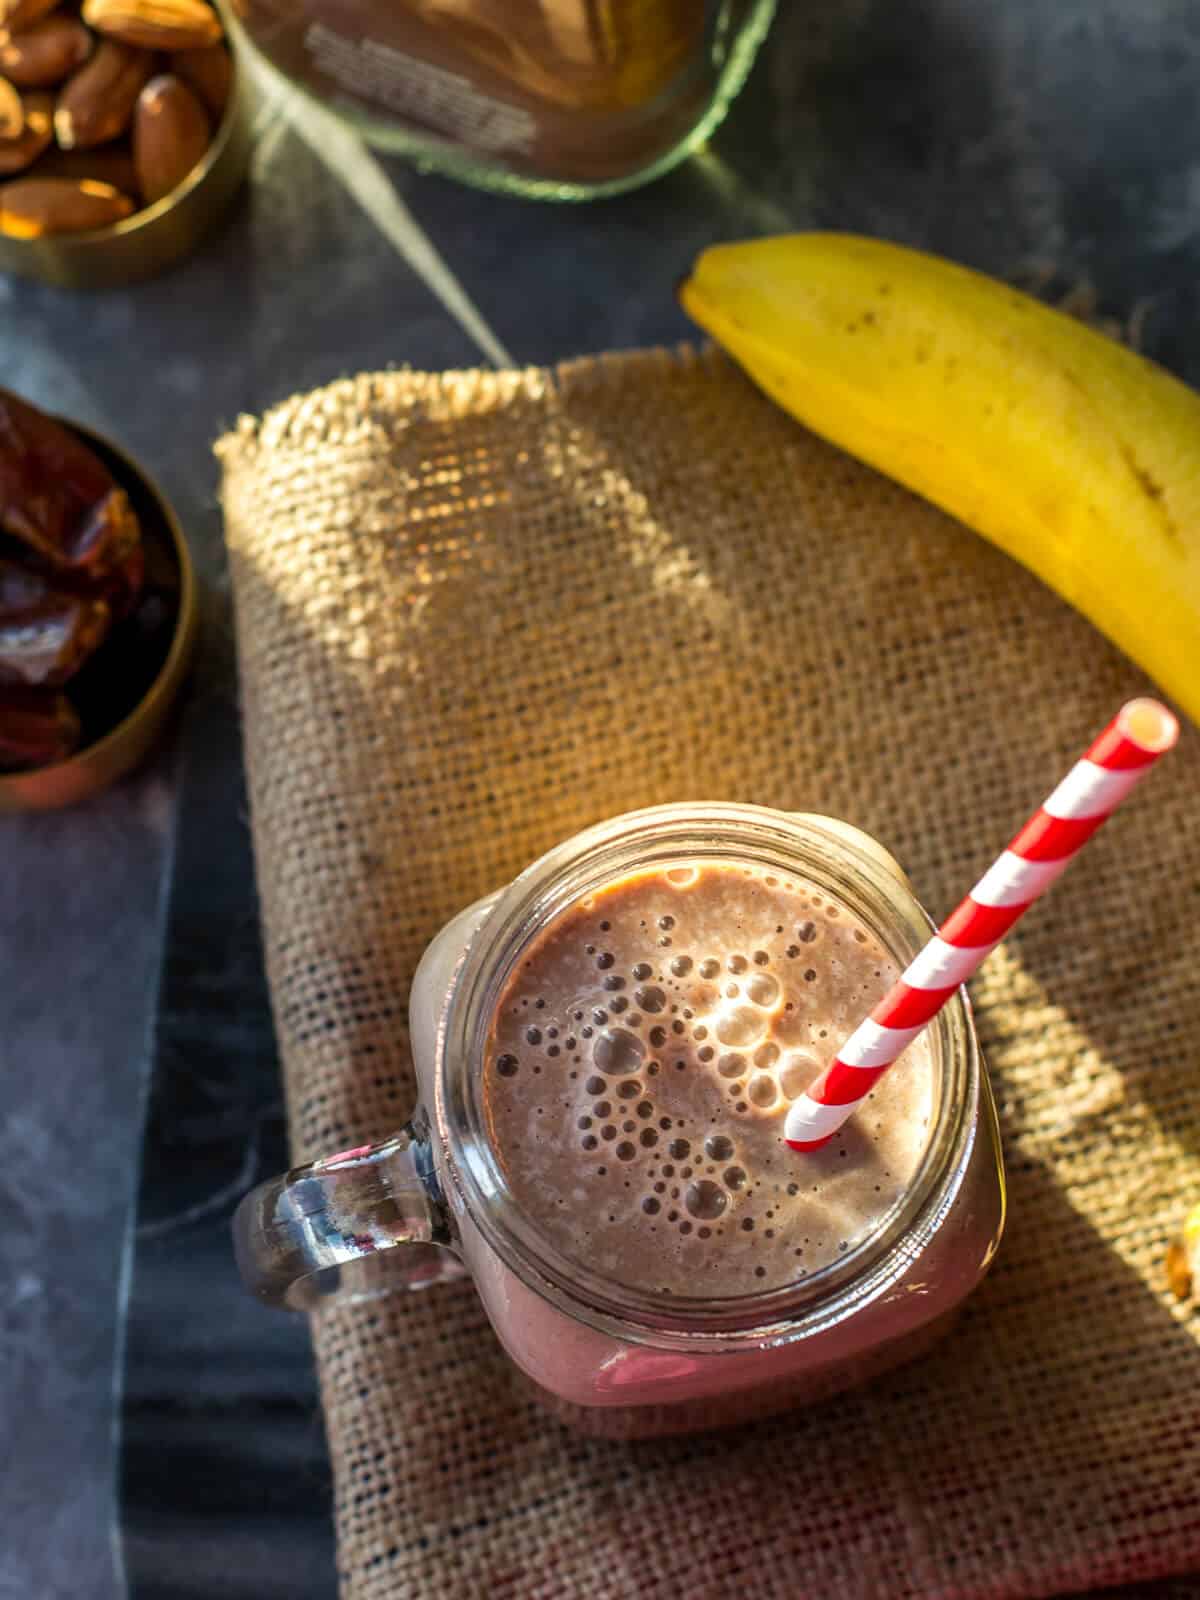 Chocolate almond smoothie served with a red and with straw. There is also a cocoa mix bottle along with almonds, dates and bananas in this picture.